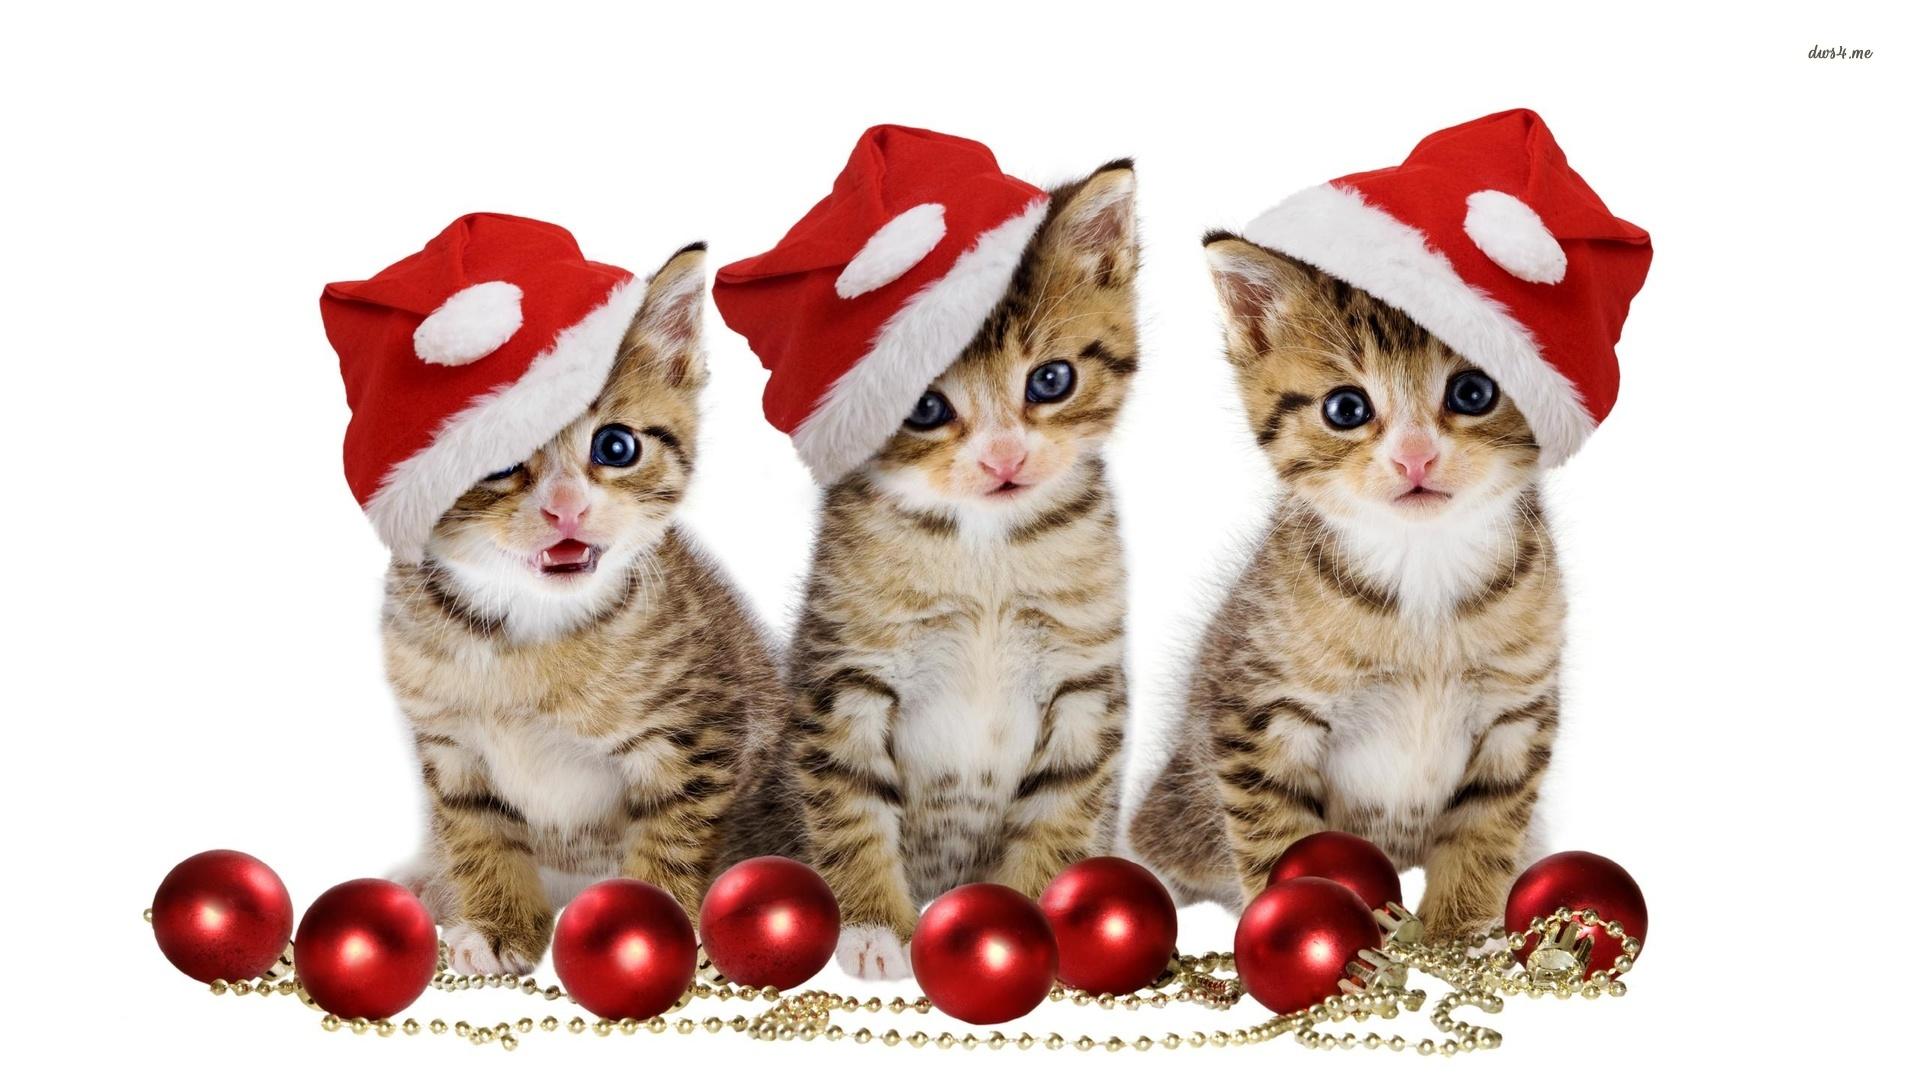 Cute Christmas kittens by the decorations wallpaper